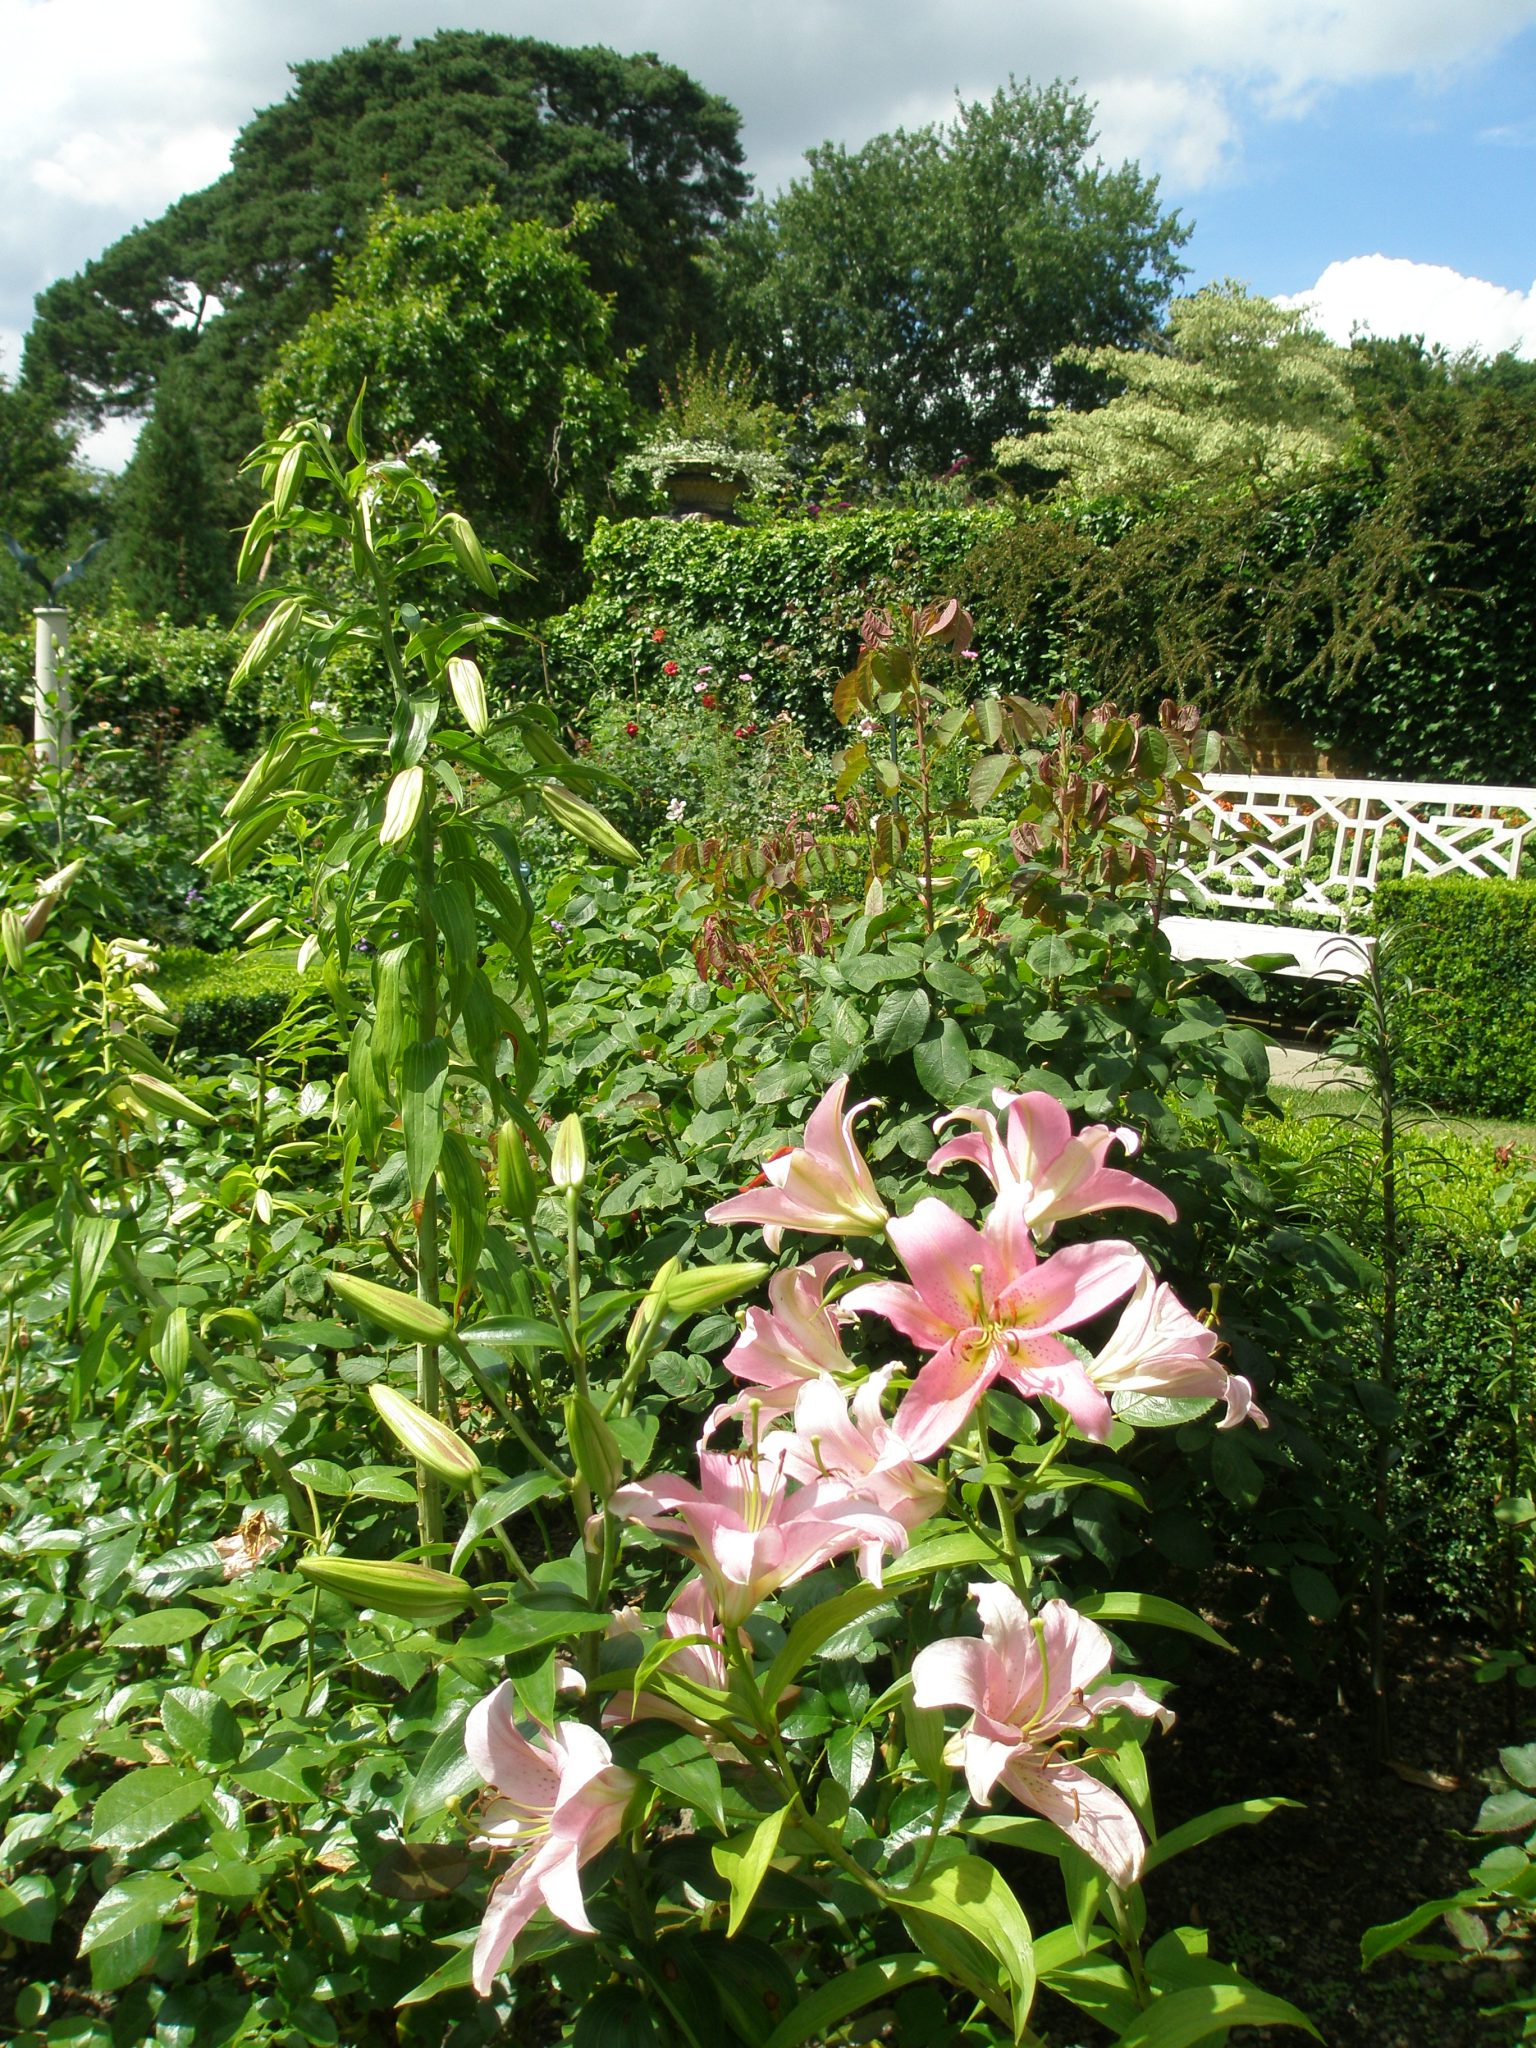 Lilies in the Rose Garden